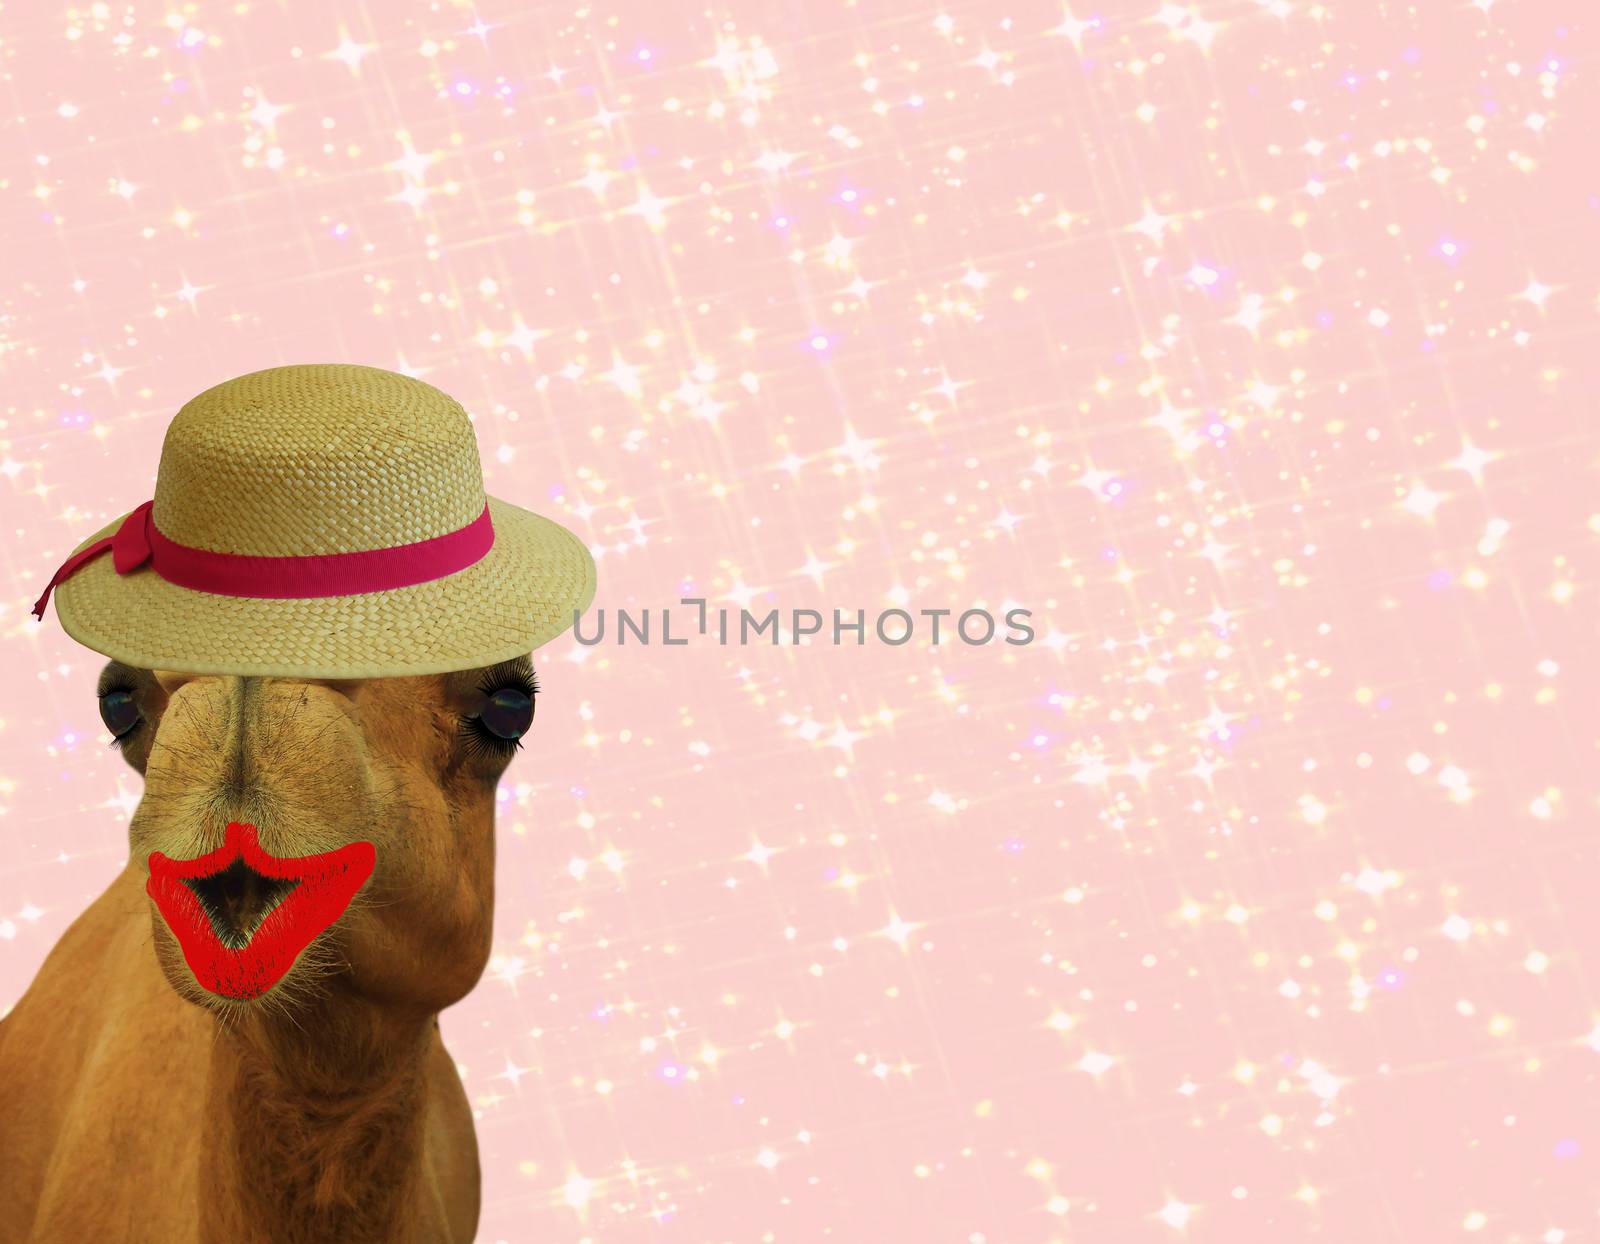 funny camel in make up with lipstick eye lashes and straw hat isolated on pink glittery girly background by charlottebleijenberg